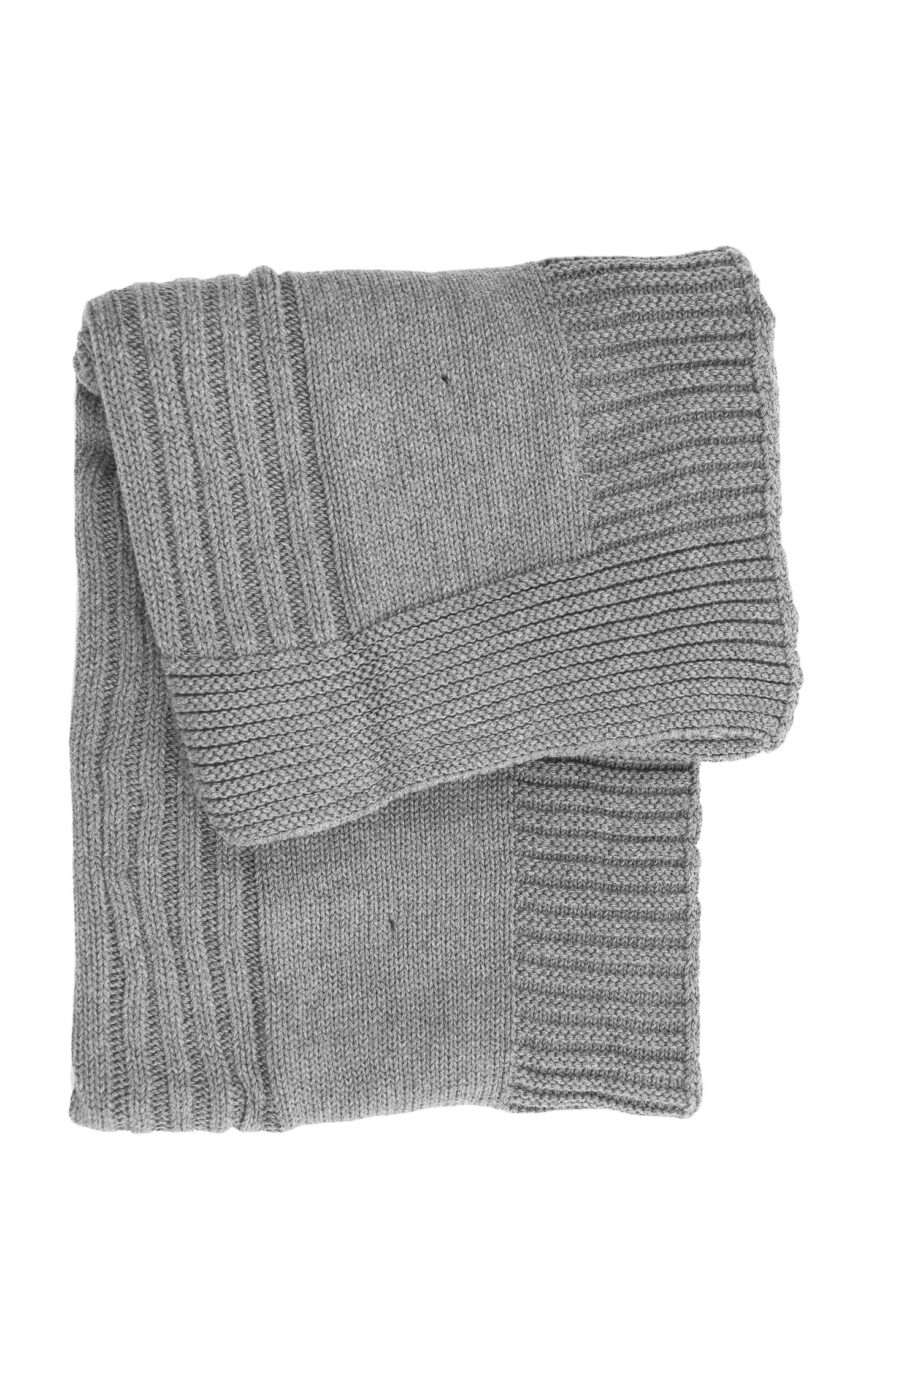 light grey knitted cotton little blanket small